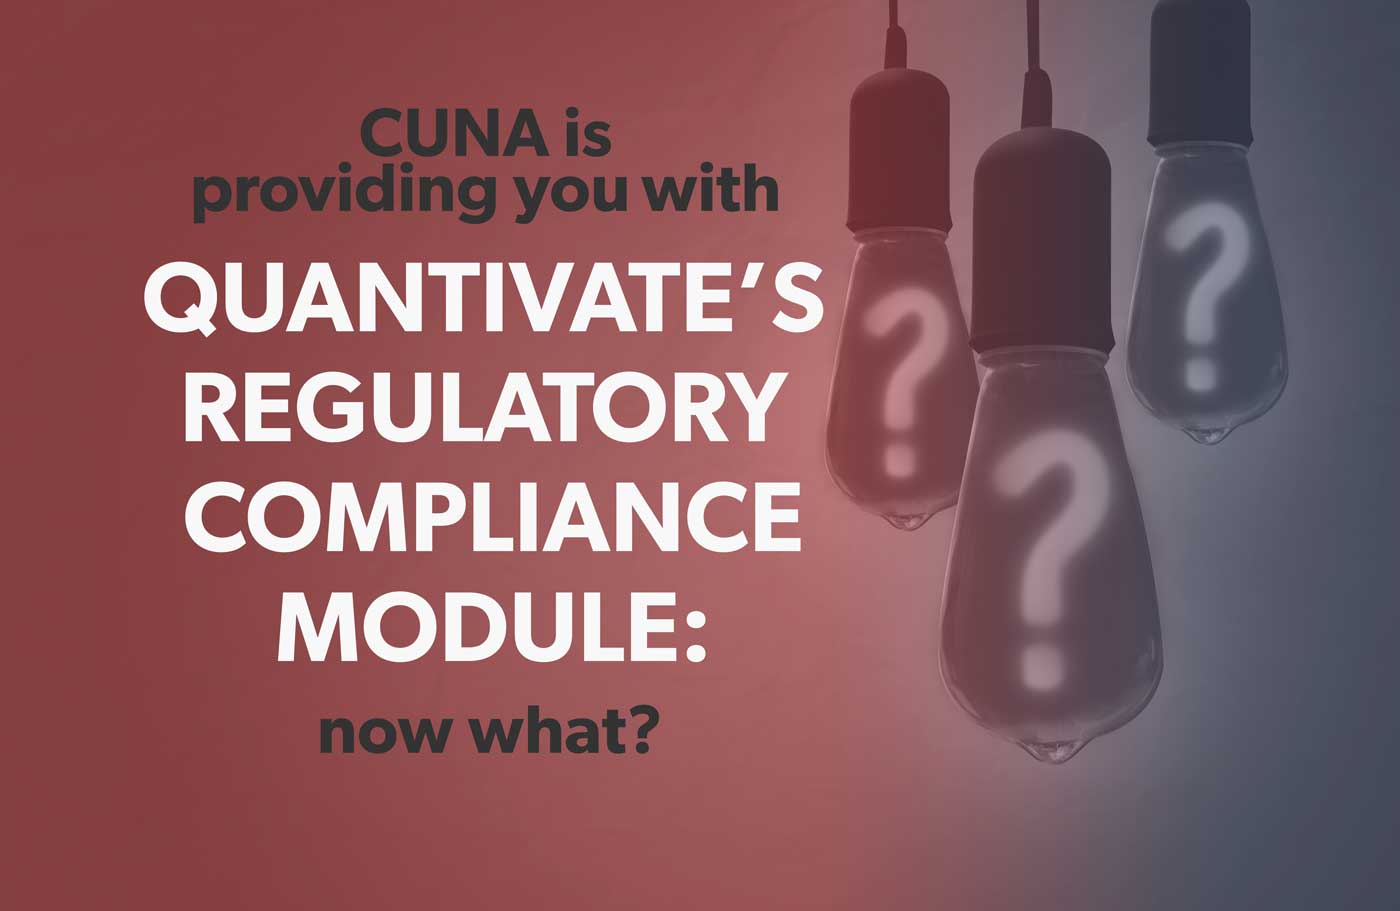 CUNA is Providing You With Quantivate’s Regulatory Compliance Module: Now What?